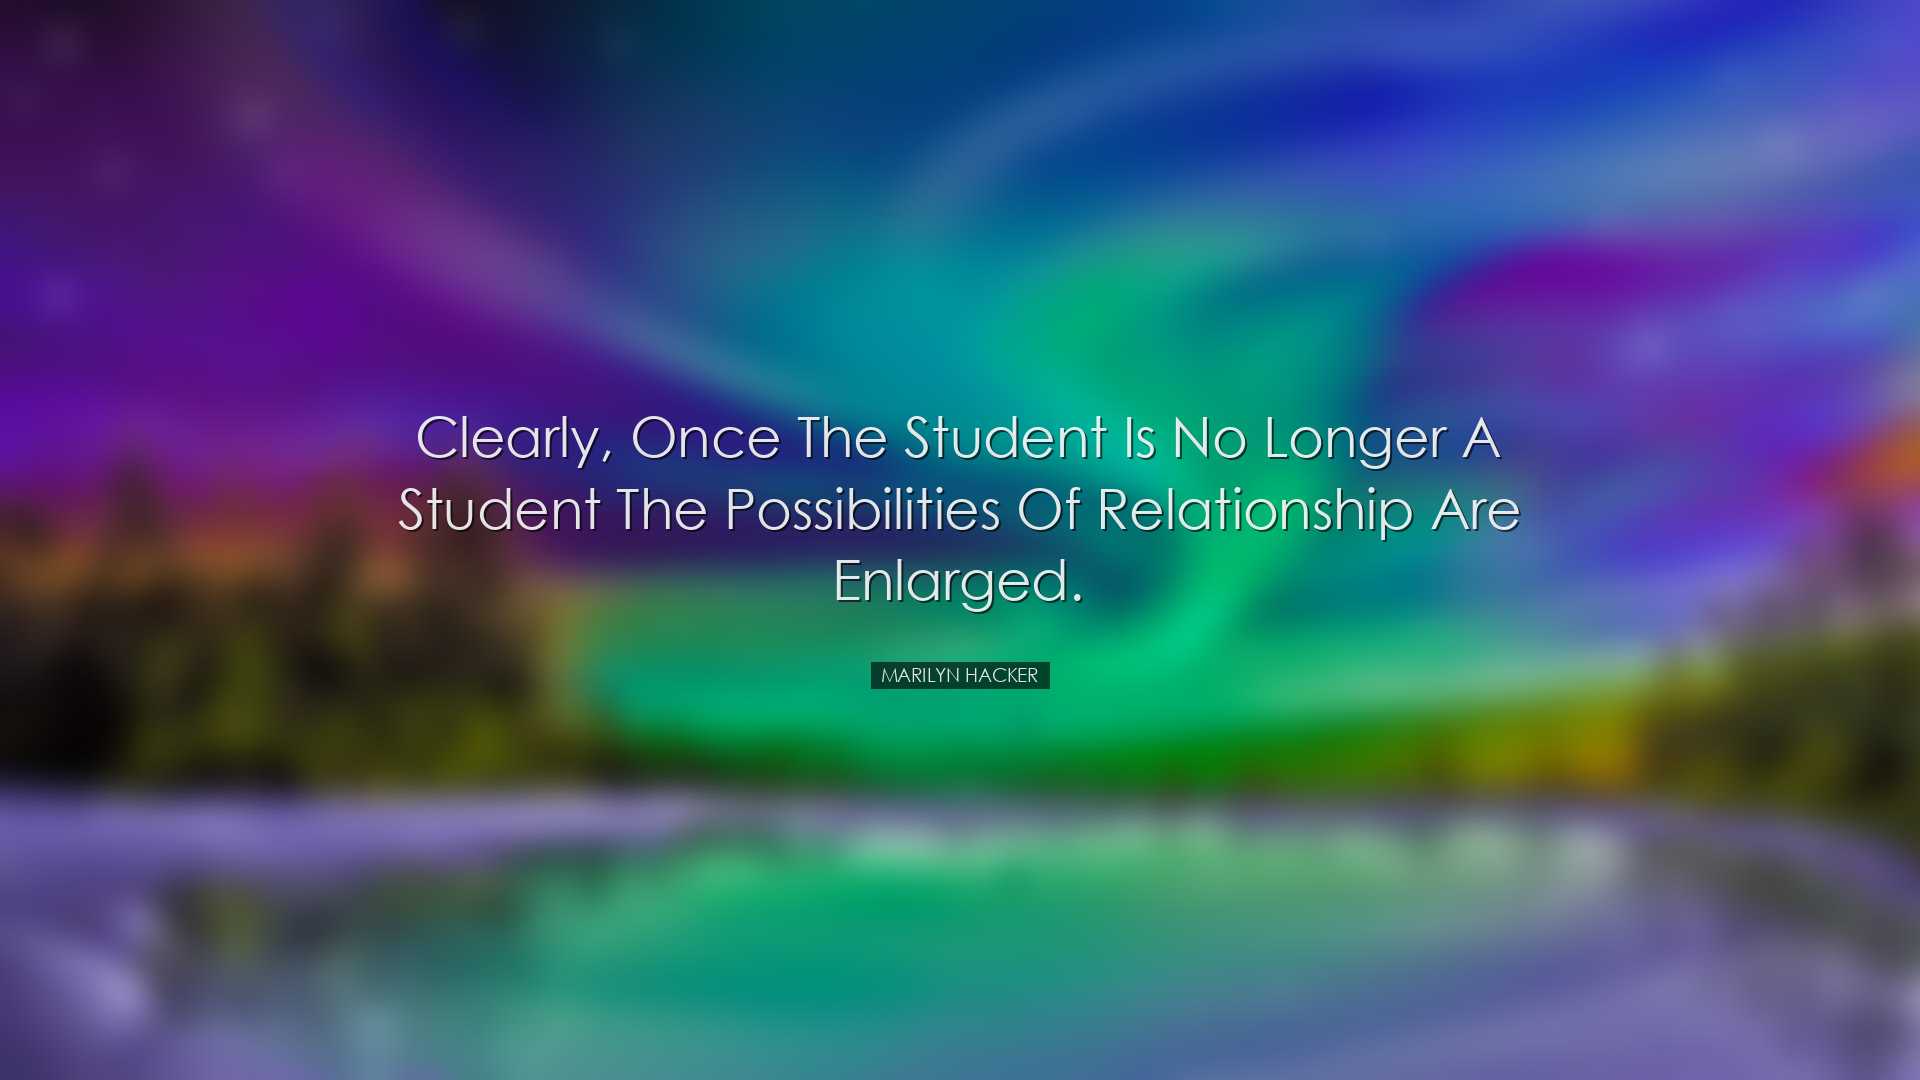 Clearly, once the student is no longer a student the possibilities